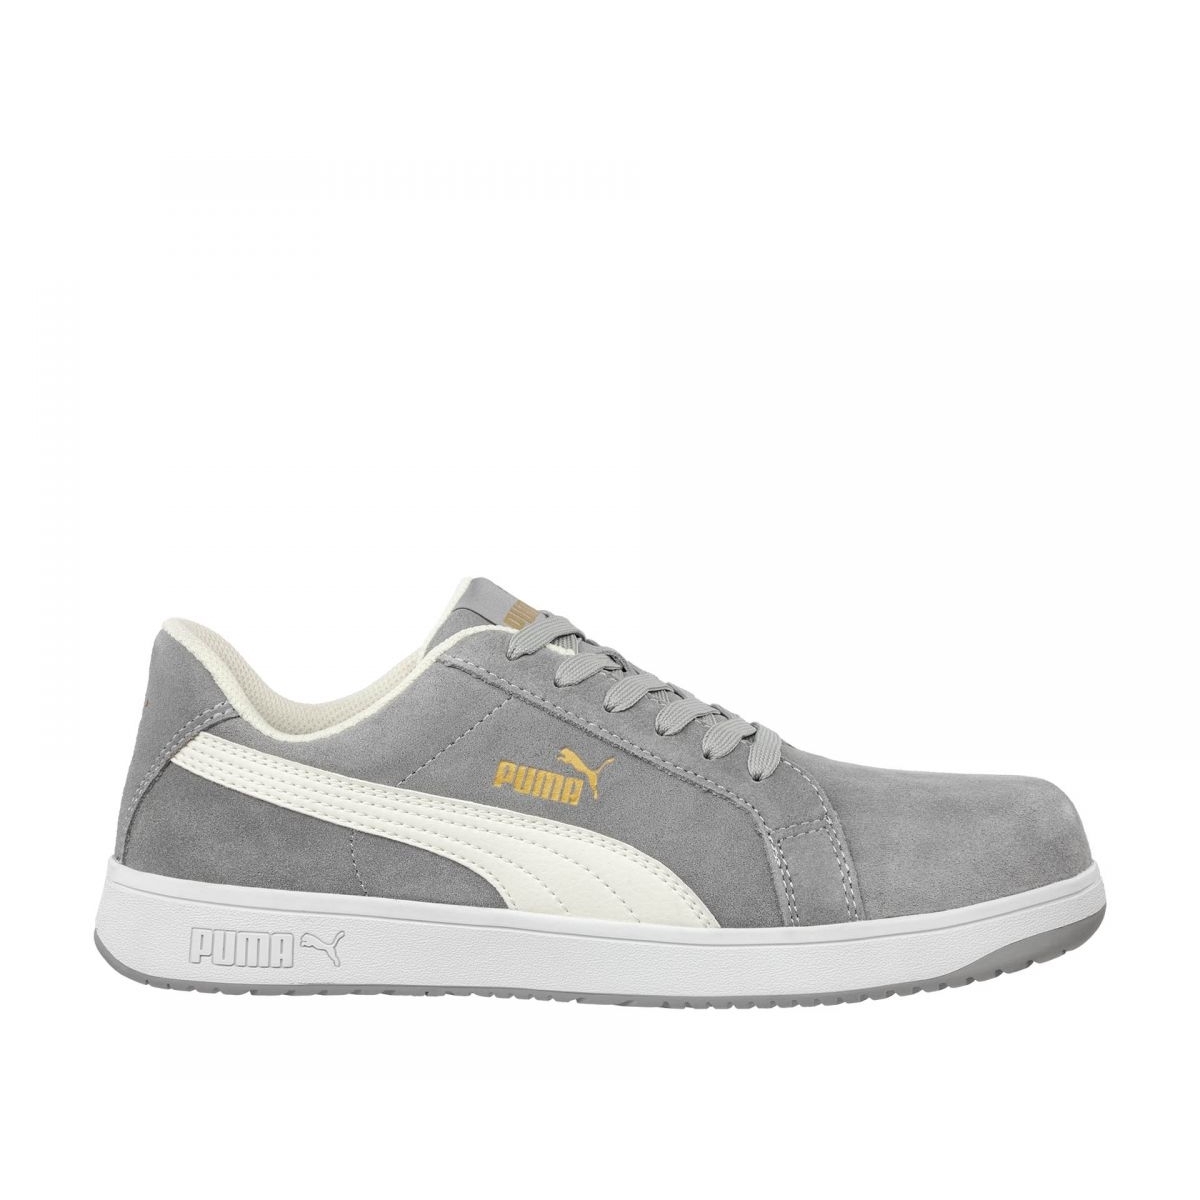 PUMA Safety Men's Iconic Low Composite Toe SD Work Shoes Grey Suede - 640035 Grey - Grey, 10.5